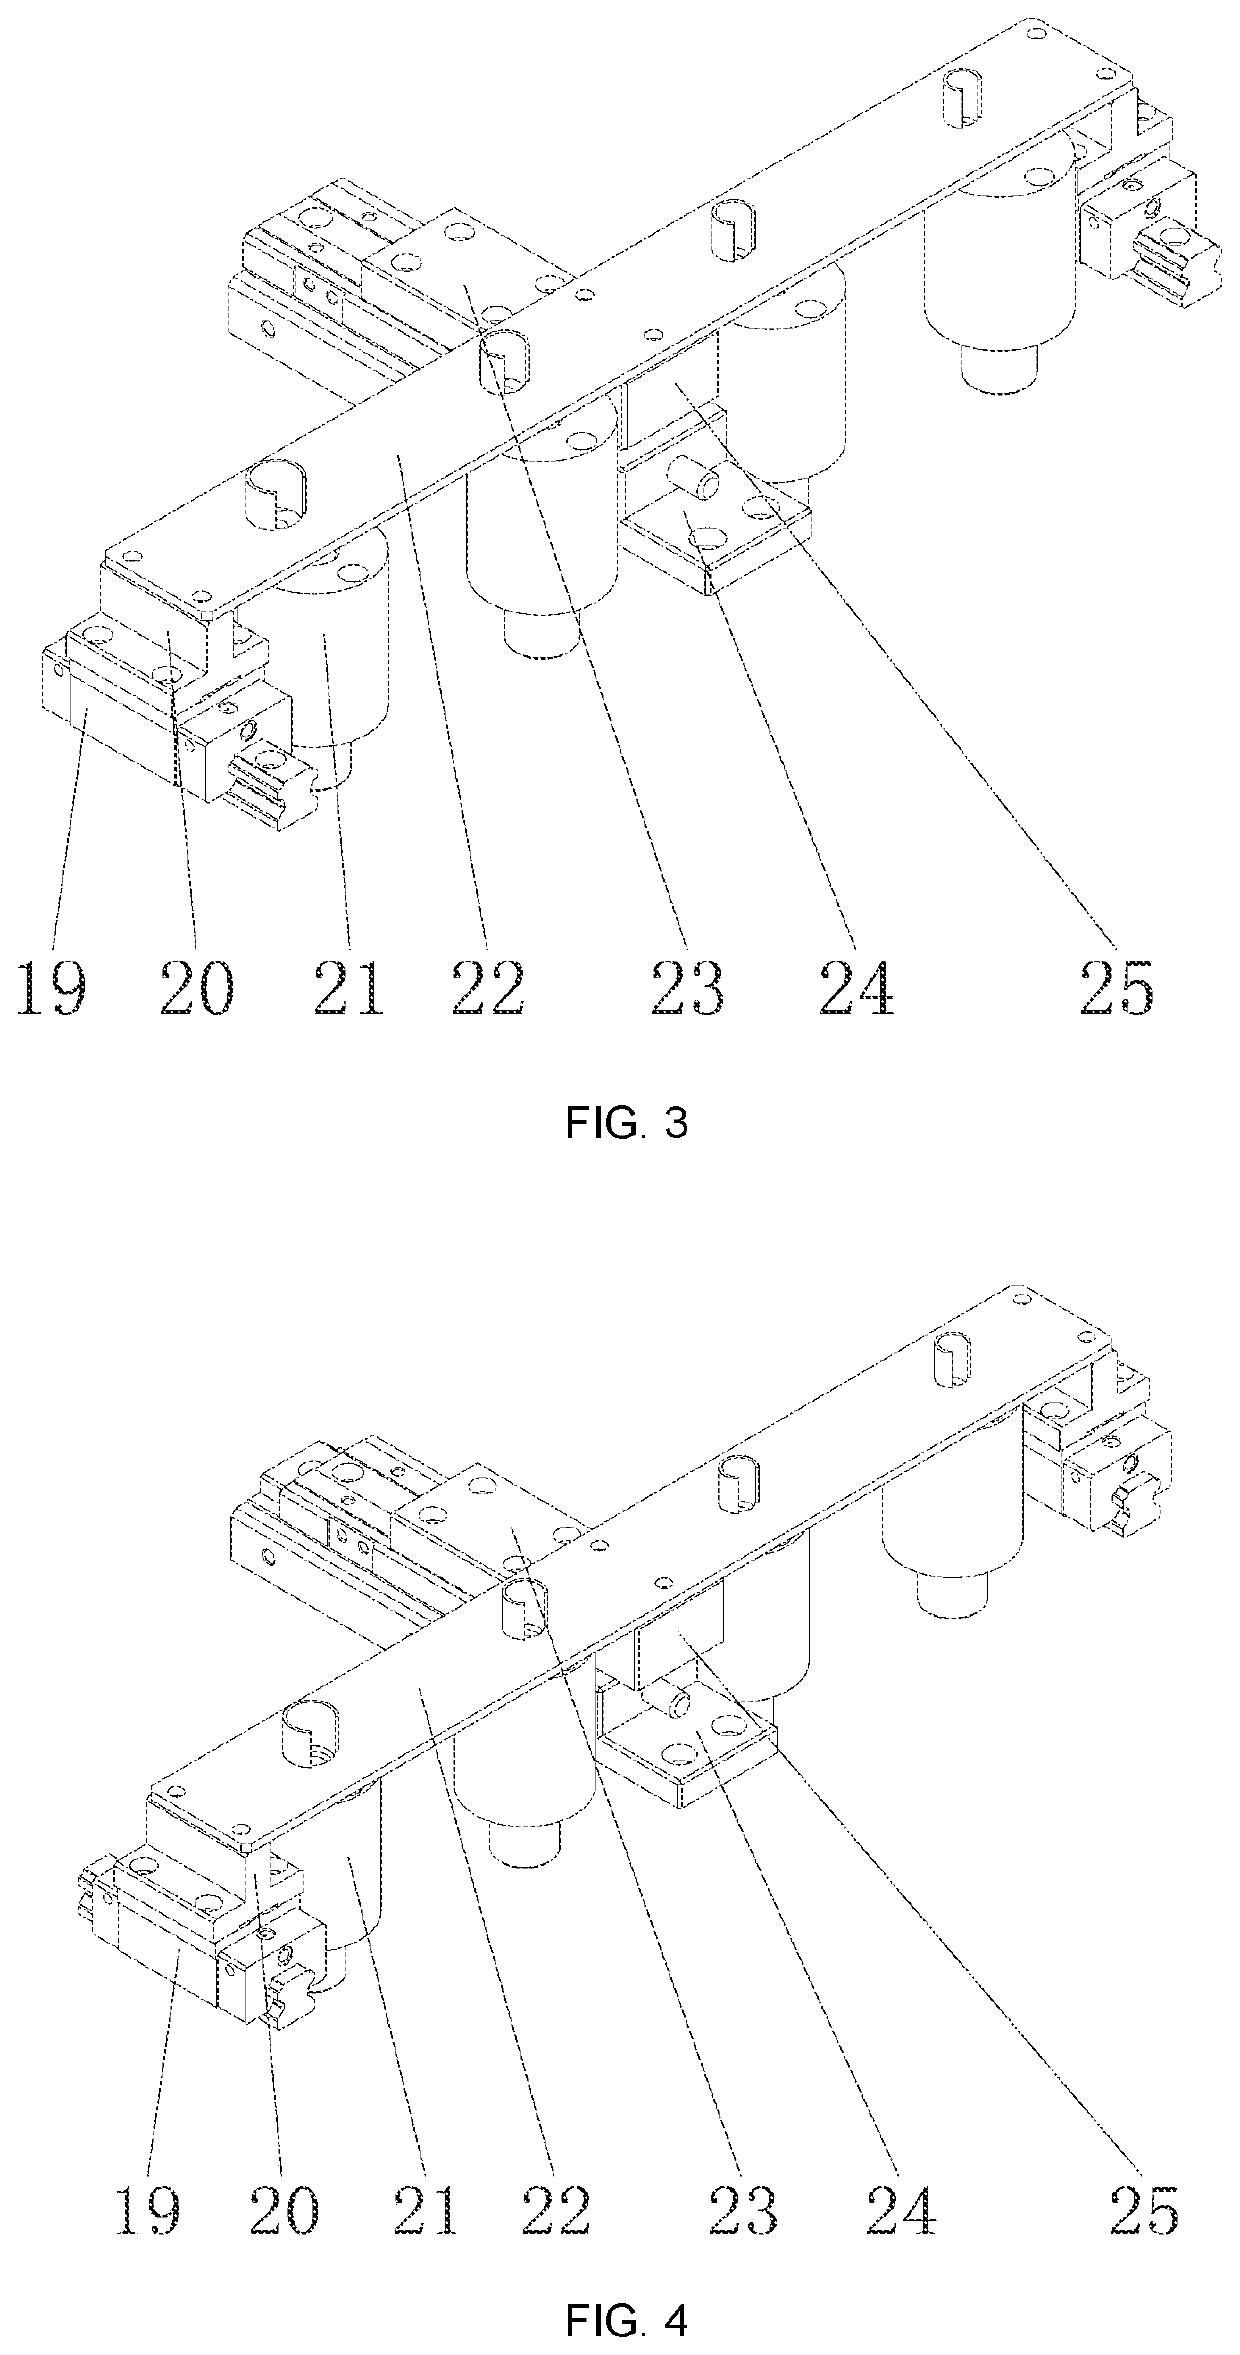 Robot vision-based automatic rivet placement system and method